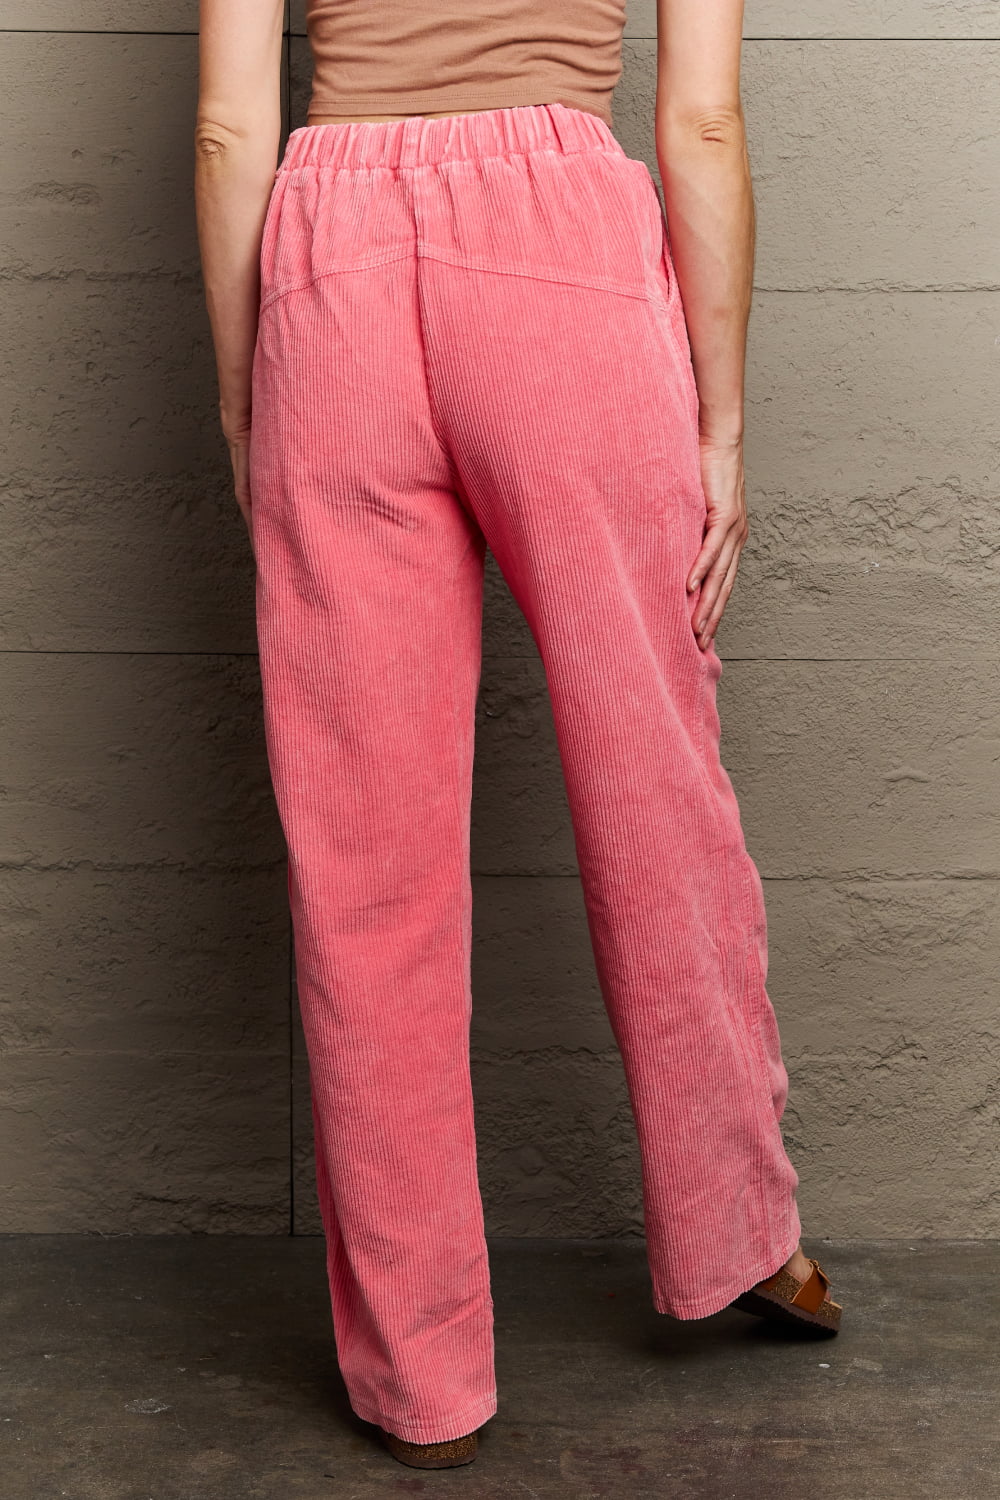 Dim Gray POL  Leap Of Faith Corduroy Straight Fit Pants in Neon Pink Sentient Beauty Fashions Apparel & Accessories